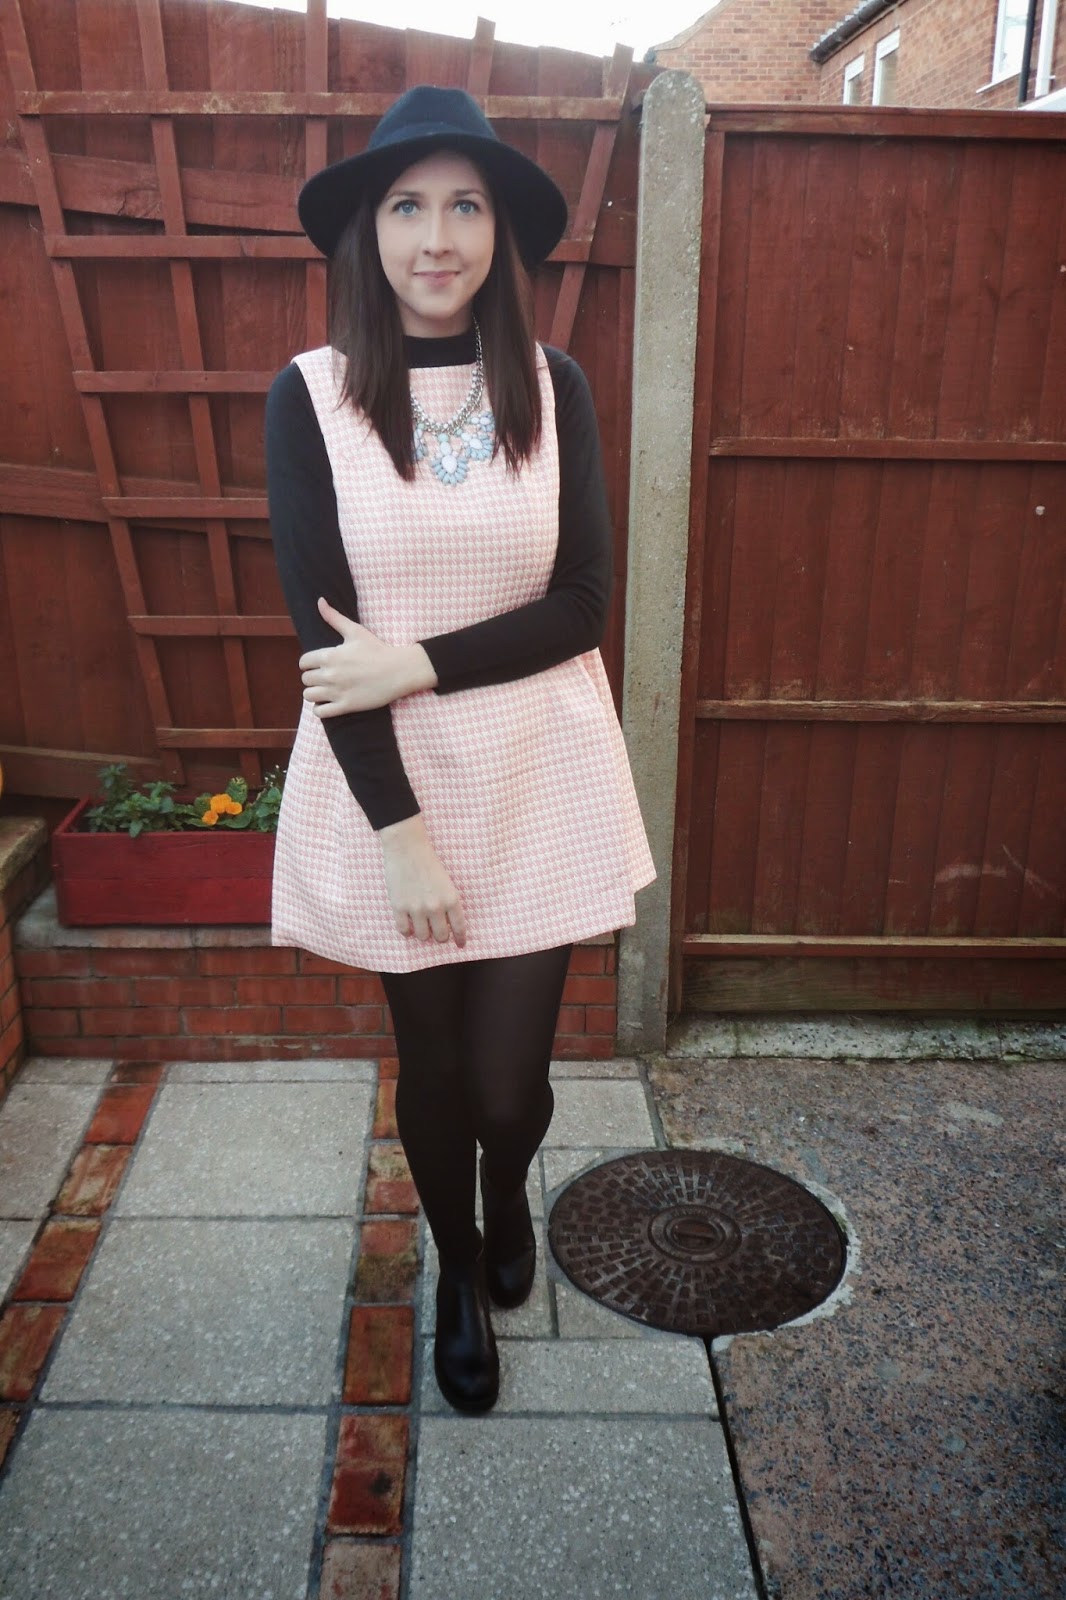 asseenonme, primark, fuschiawhite, asos, wiw, whatimwearing, whatibought, ootd, outfitoftheday, lotd, lookoftheday, fashion, fbloggers, fblogger, fahionblogger, newlook, rollneck, winterfashion, gingham